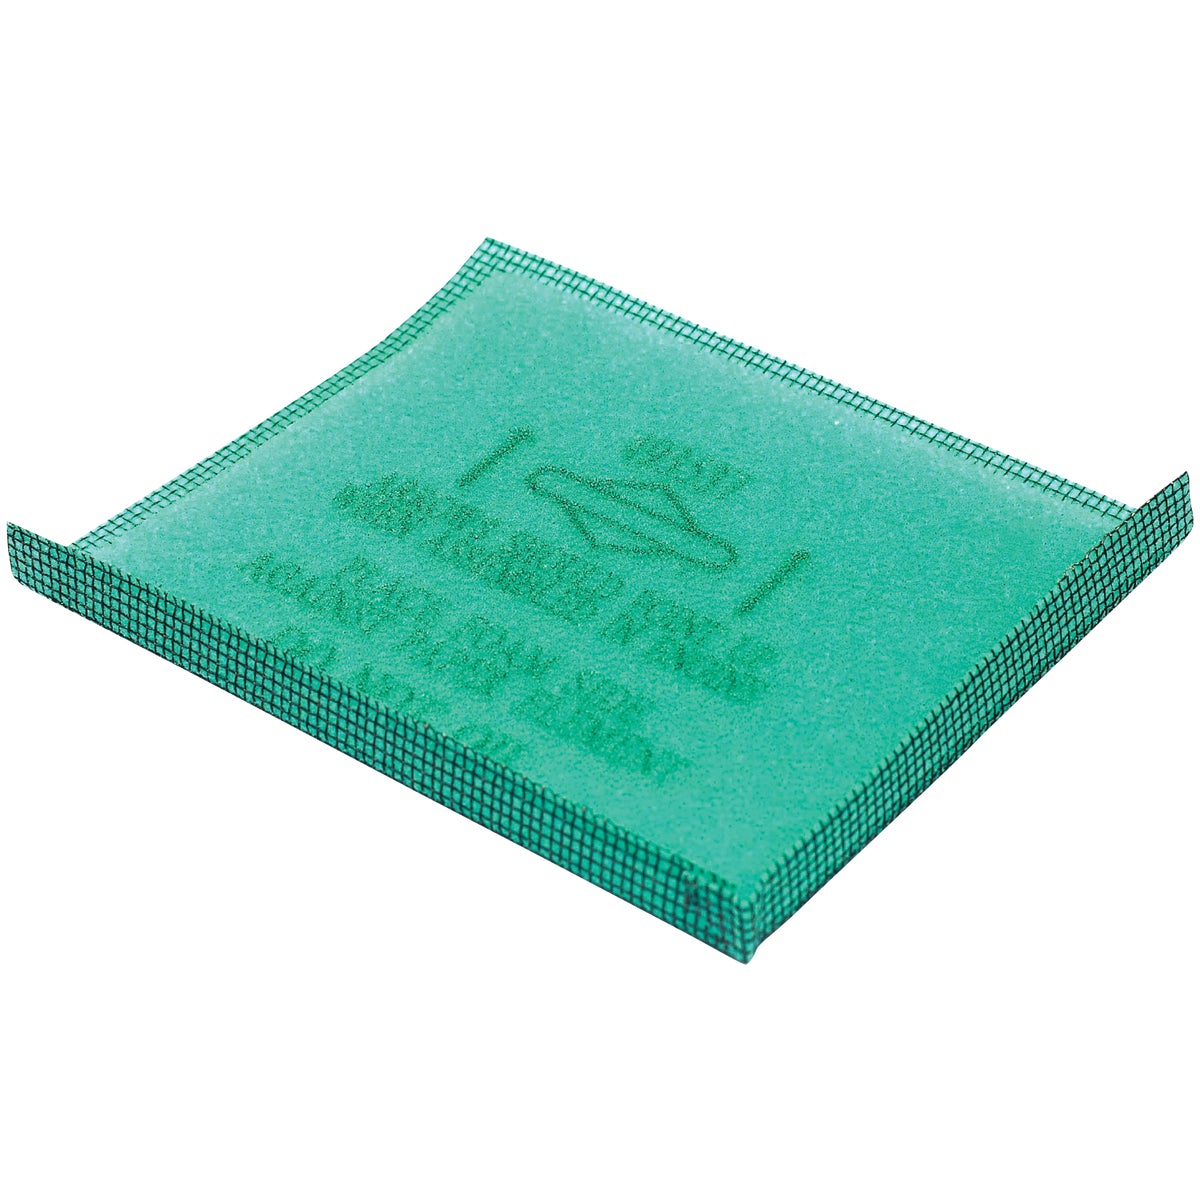 Item 748027, Flat style foam pre-cleaner provides superior protection against the 